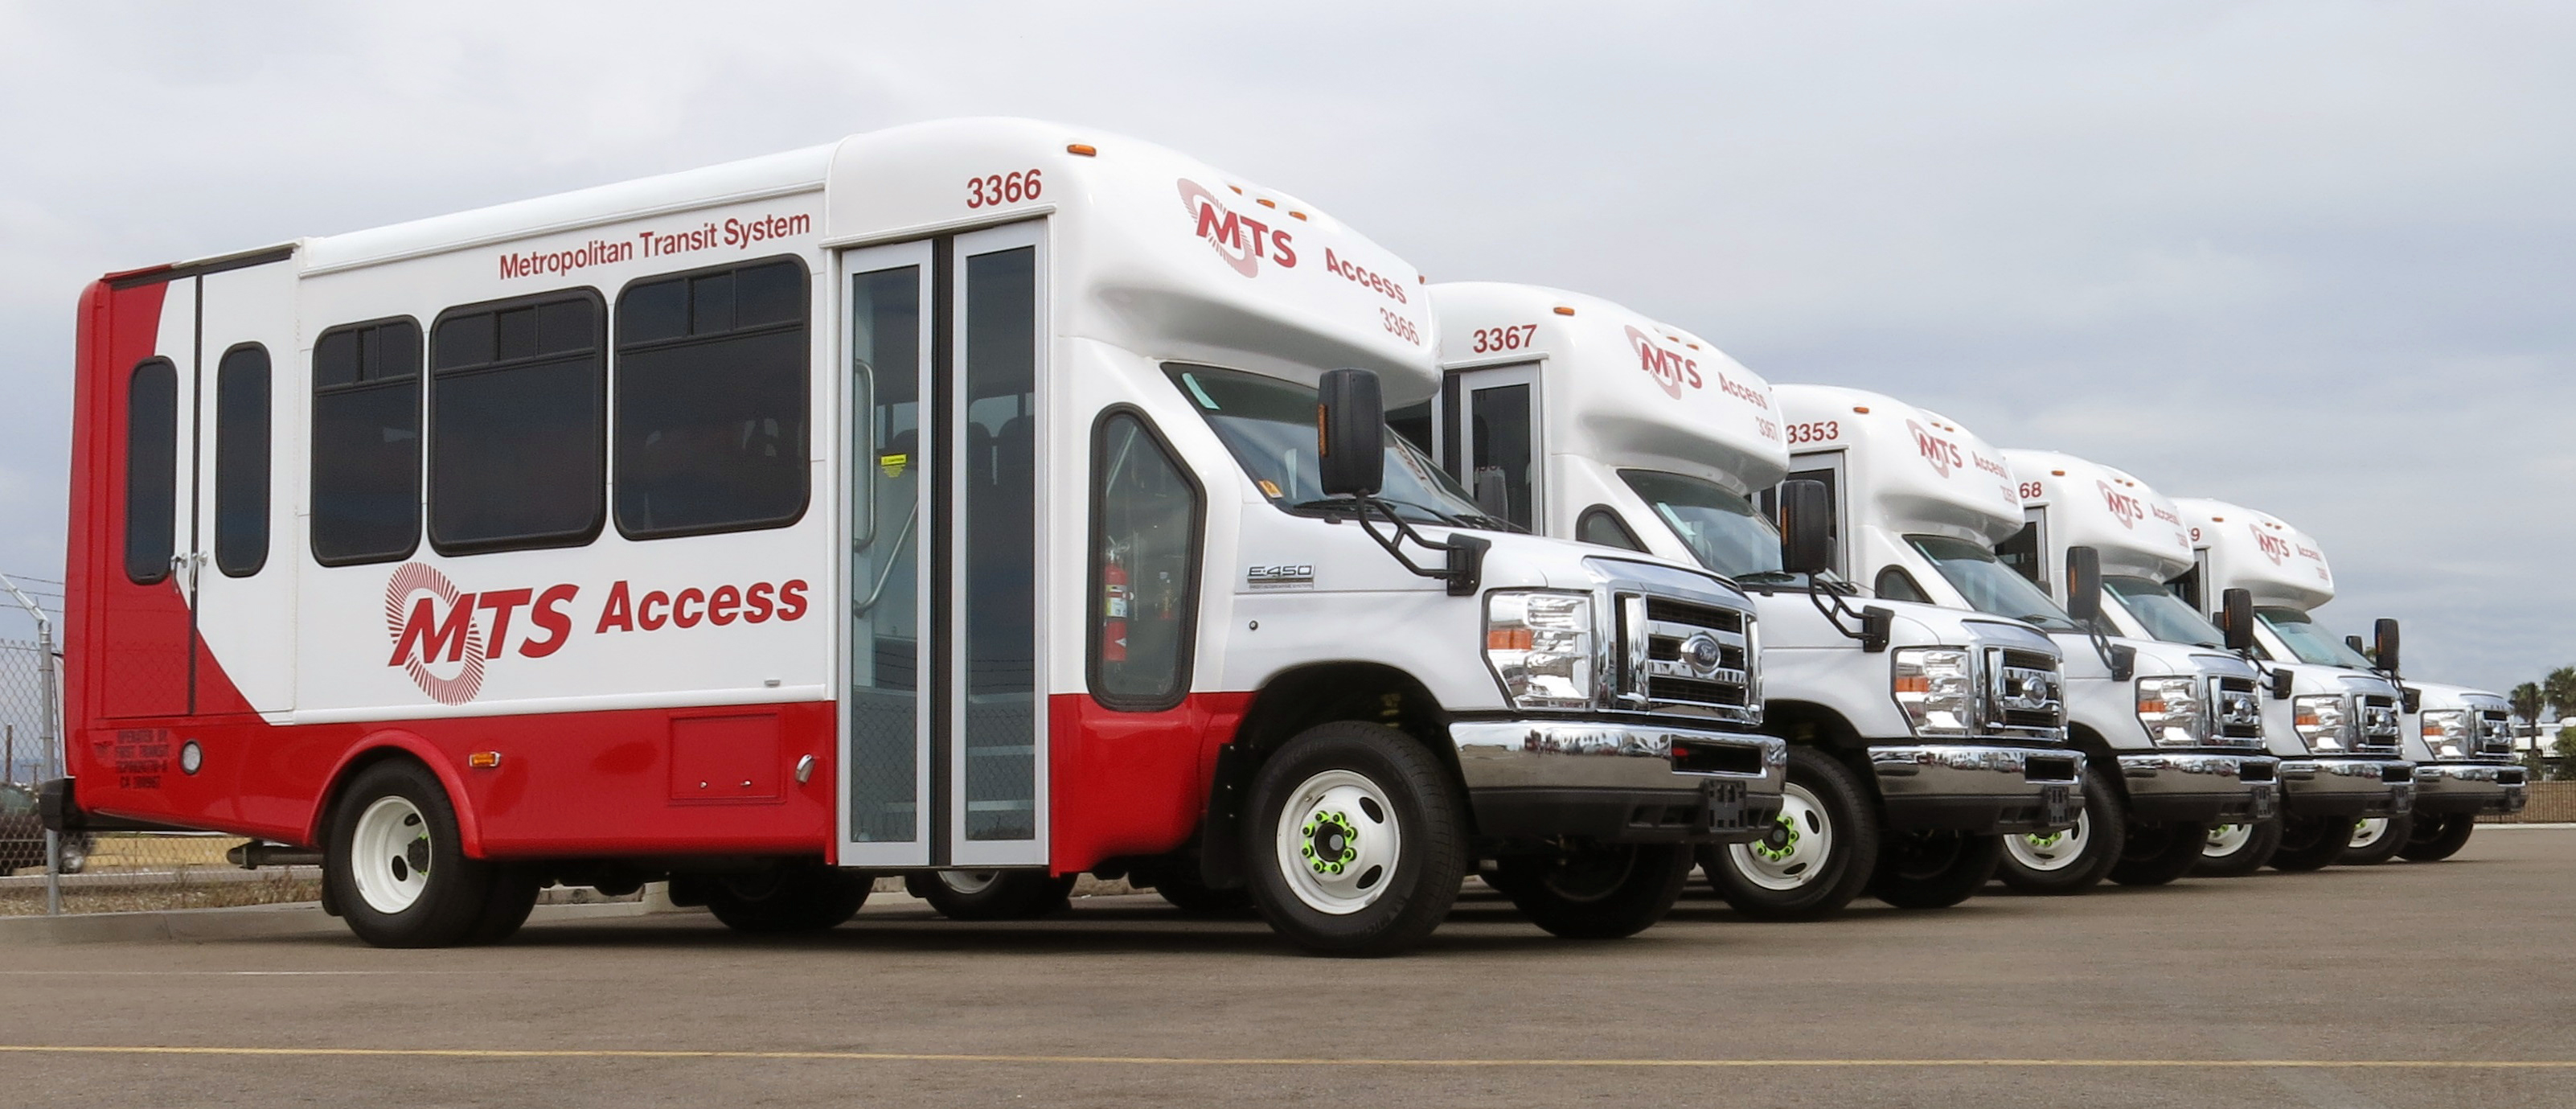 MTS Rolls Out Buses Powered by Eco-Friendly Propane | San Diego